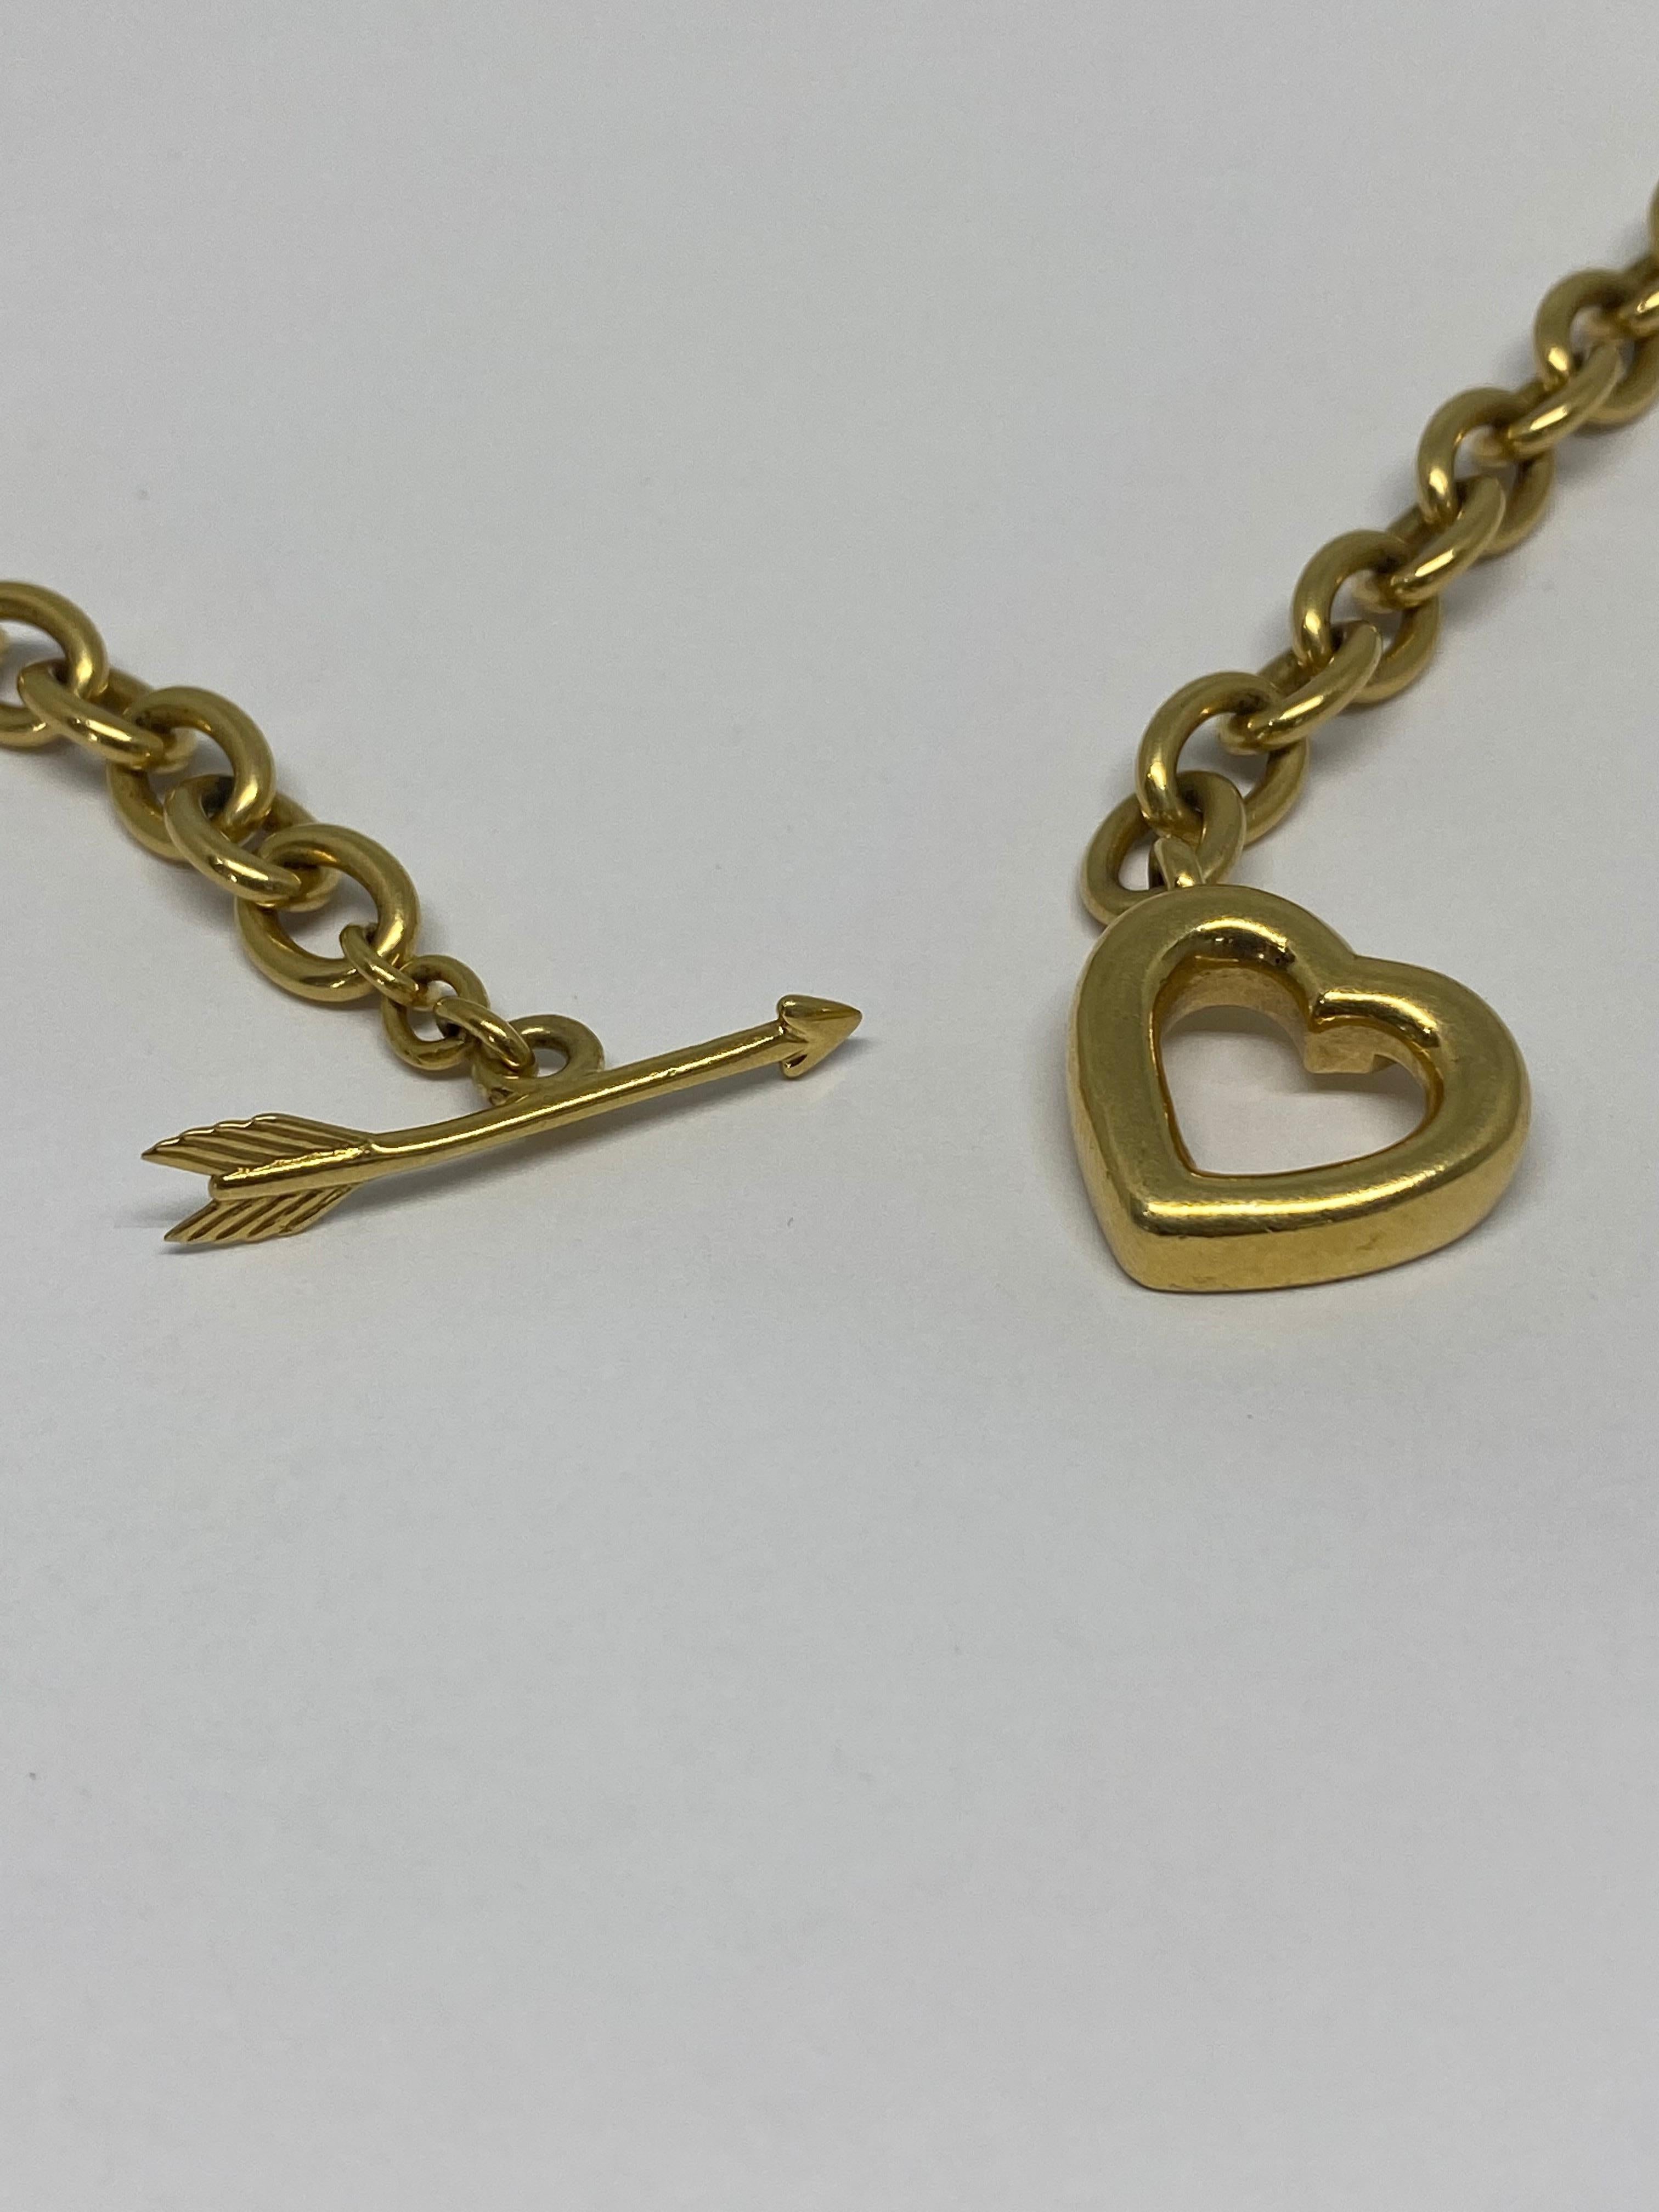 Vintage Tiffany & Co. Toggle Yellow Gold Heart and Error Link Chain Necklace  3